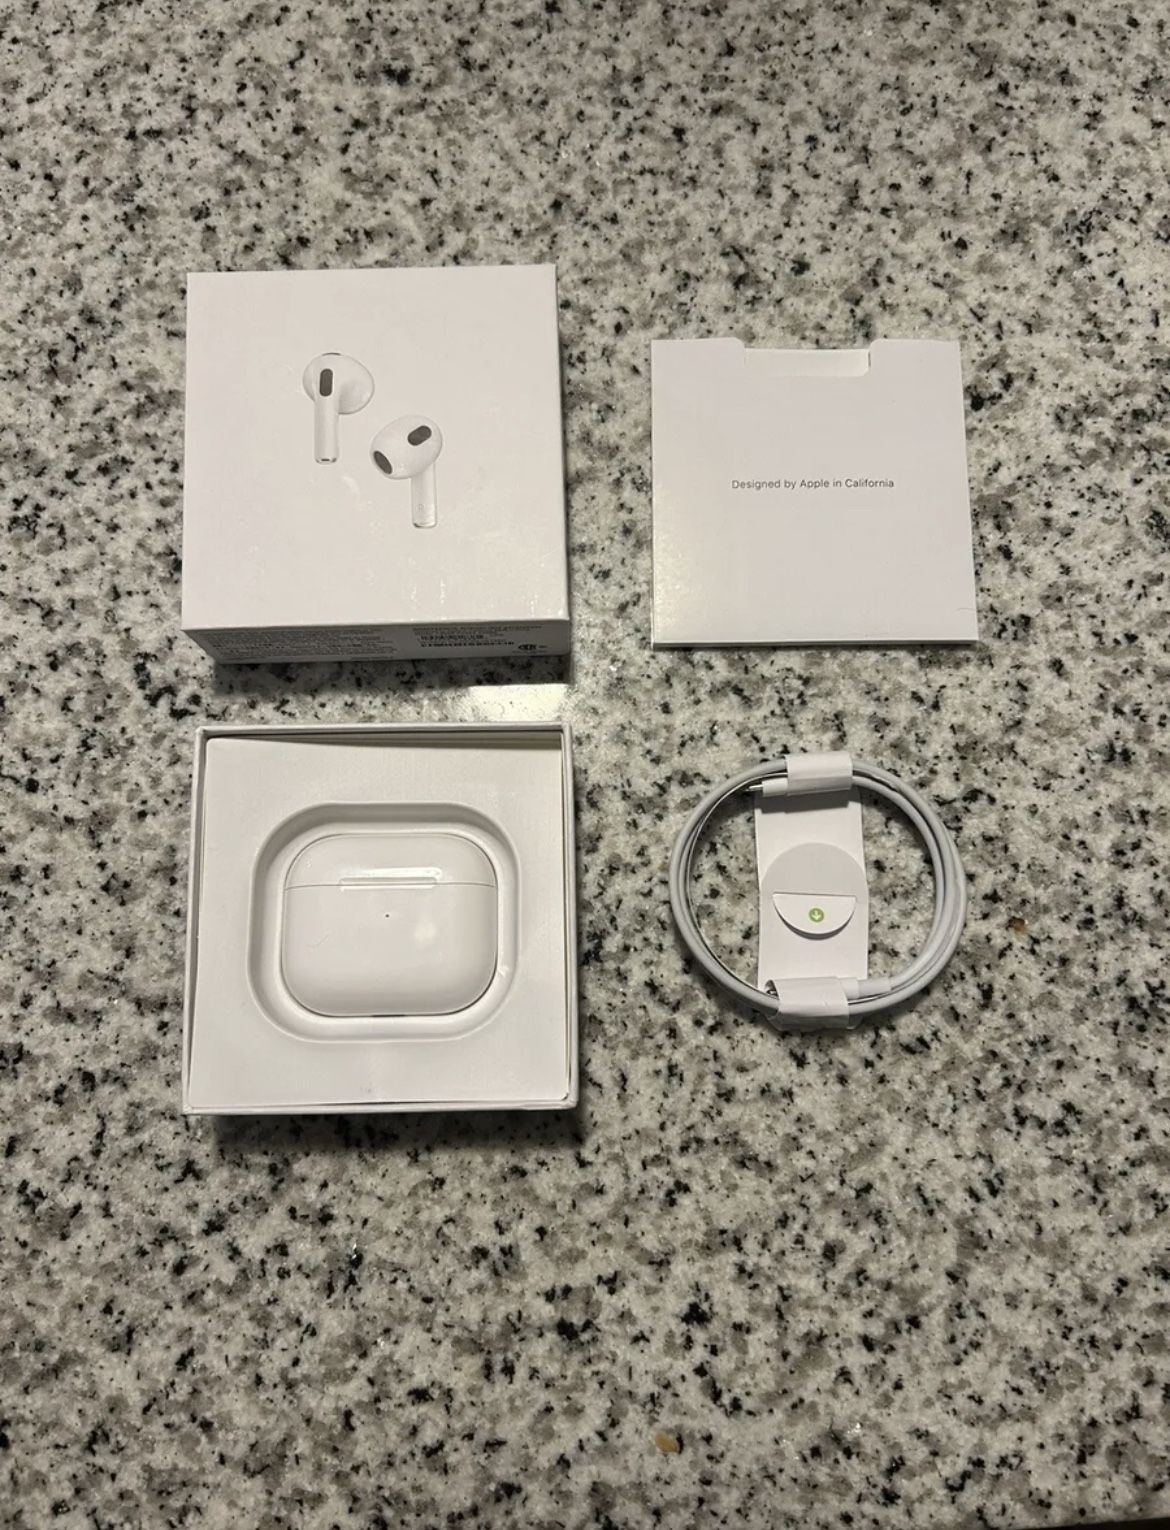 AIRPODS (3RD GENERATION) BLUETOOTH WIRELESS EARBUDS CHARGING CASE - WHITE